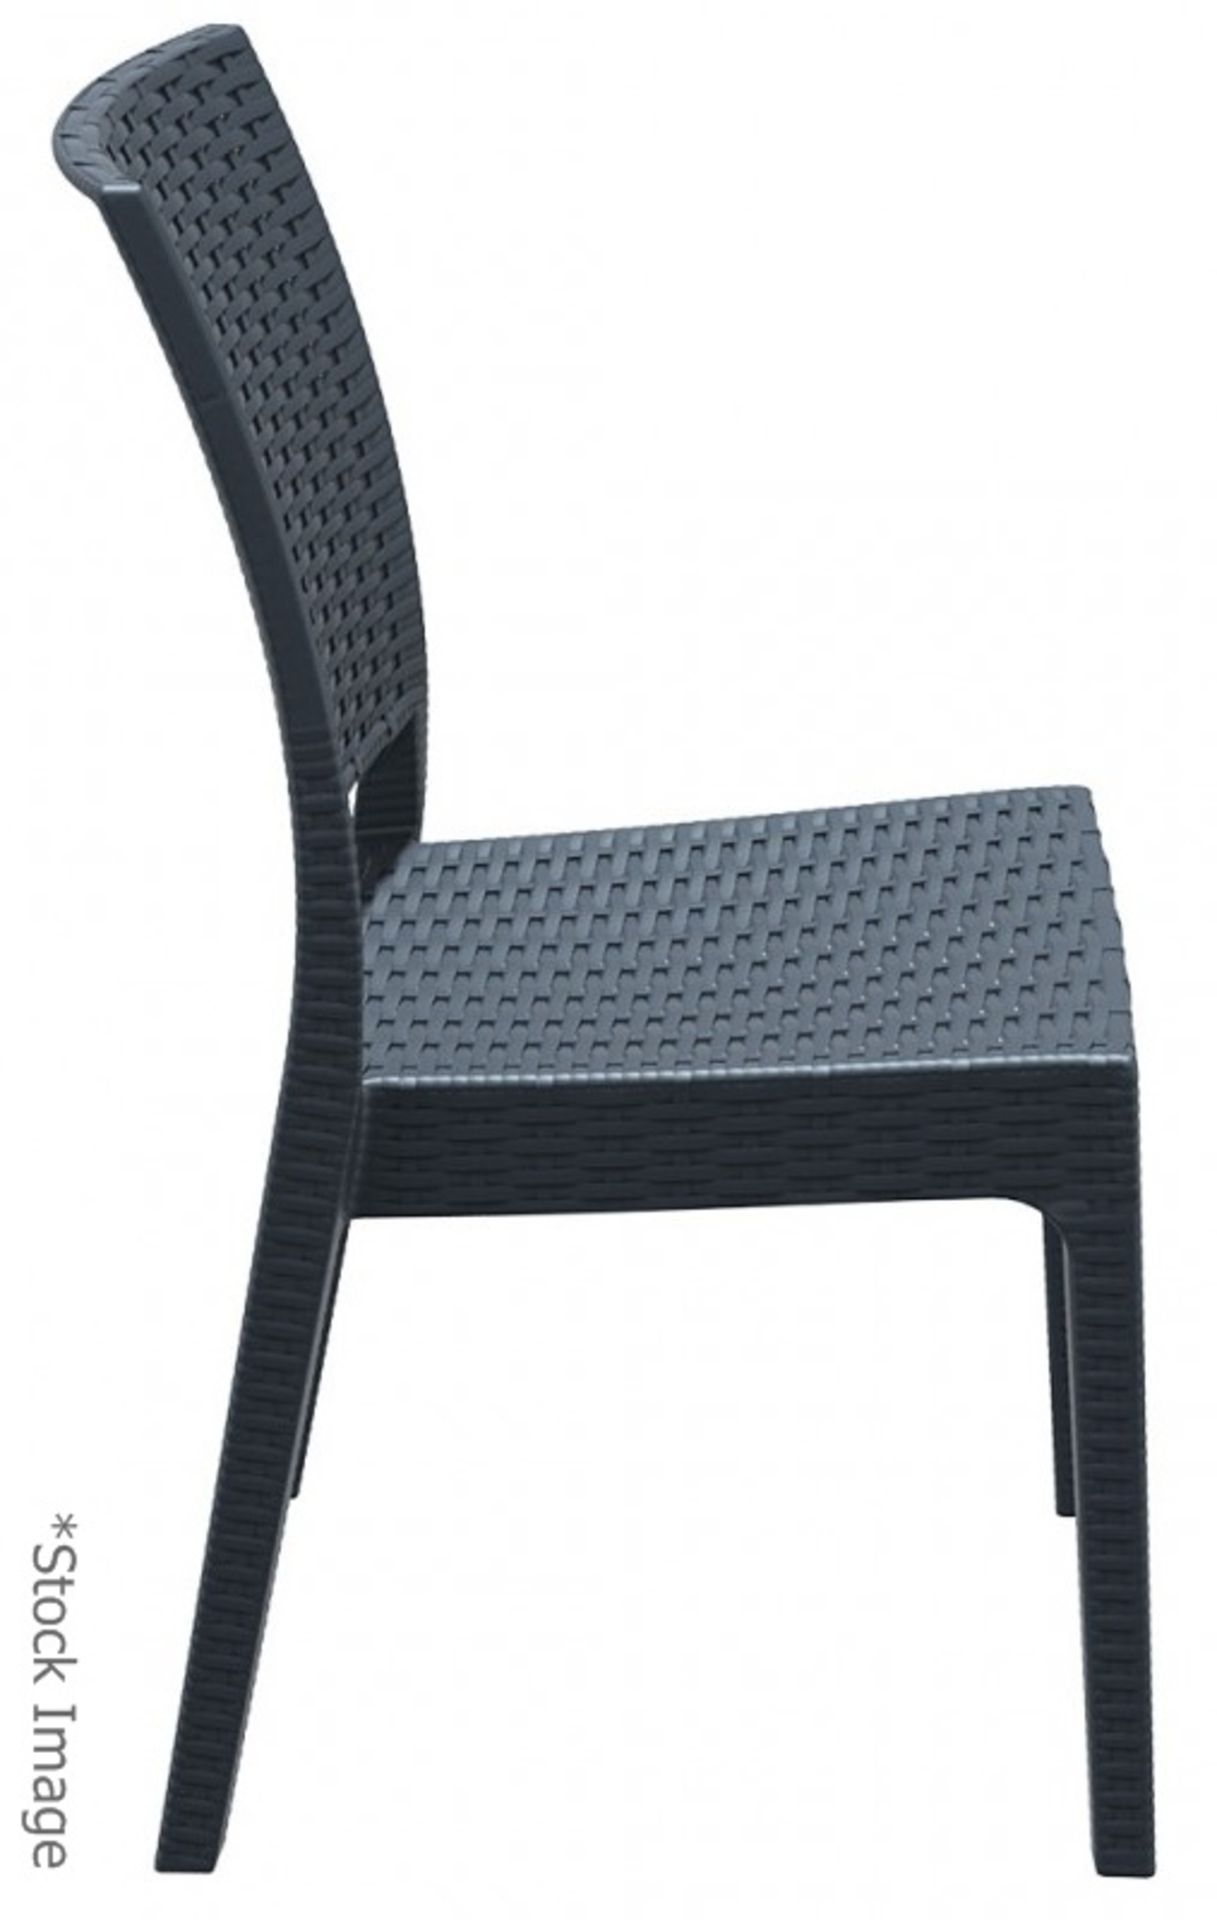 8 x SIESTA EXCLUSIVE 'Florida' Commercial Stackable Rattan-style Chairs In Dark Grey - CL987 - - Image 5 of 13